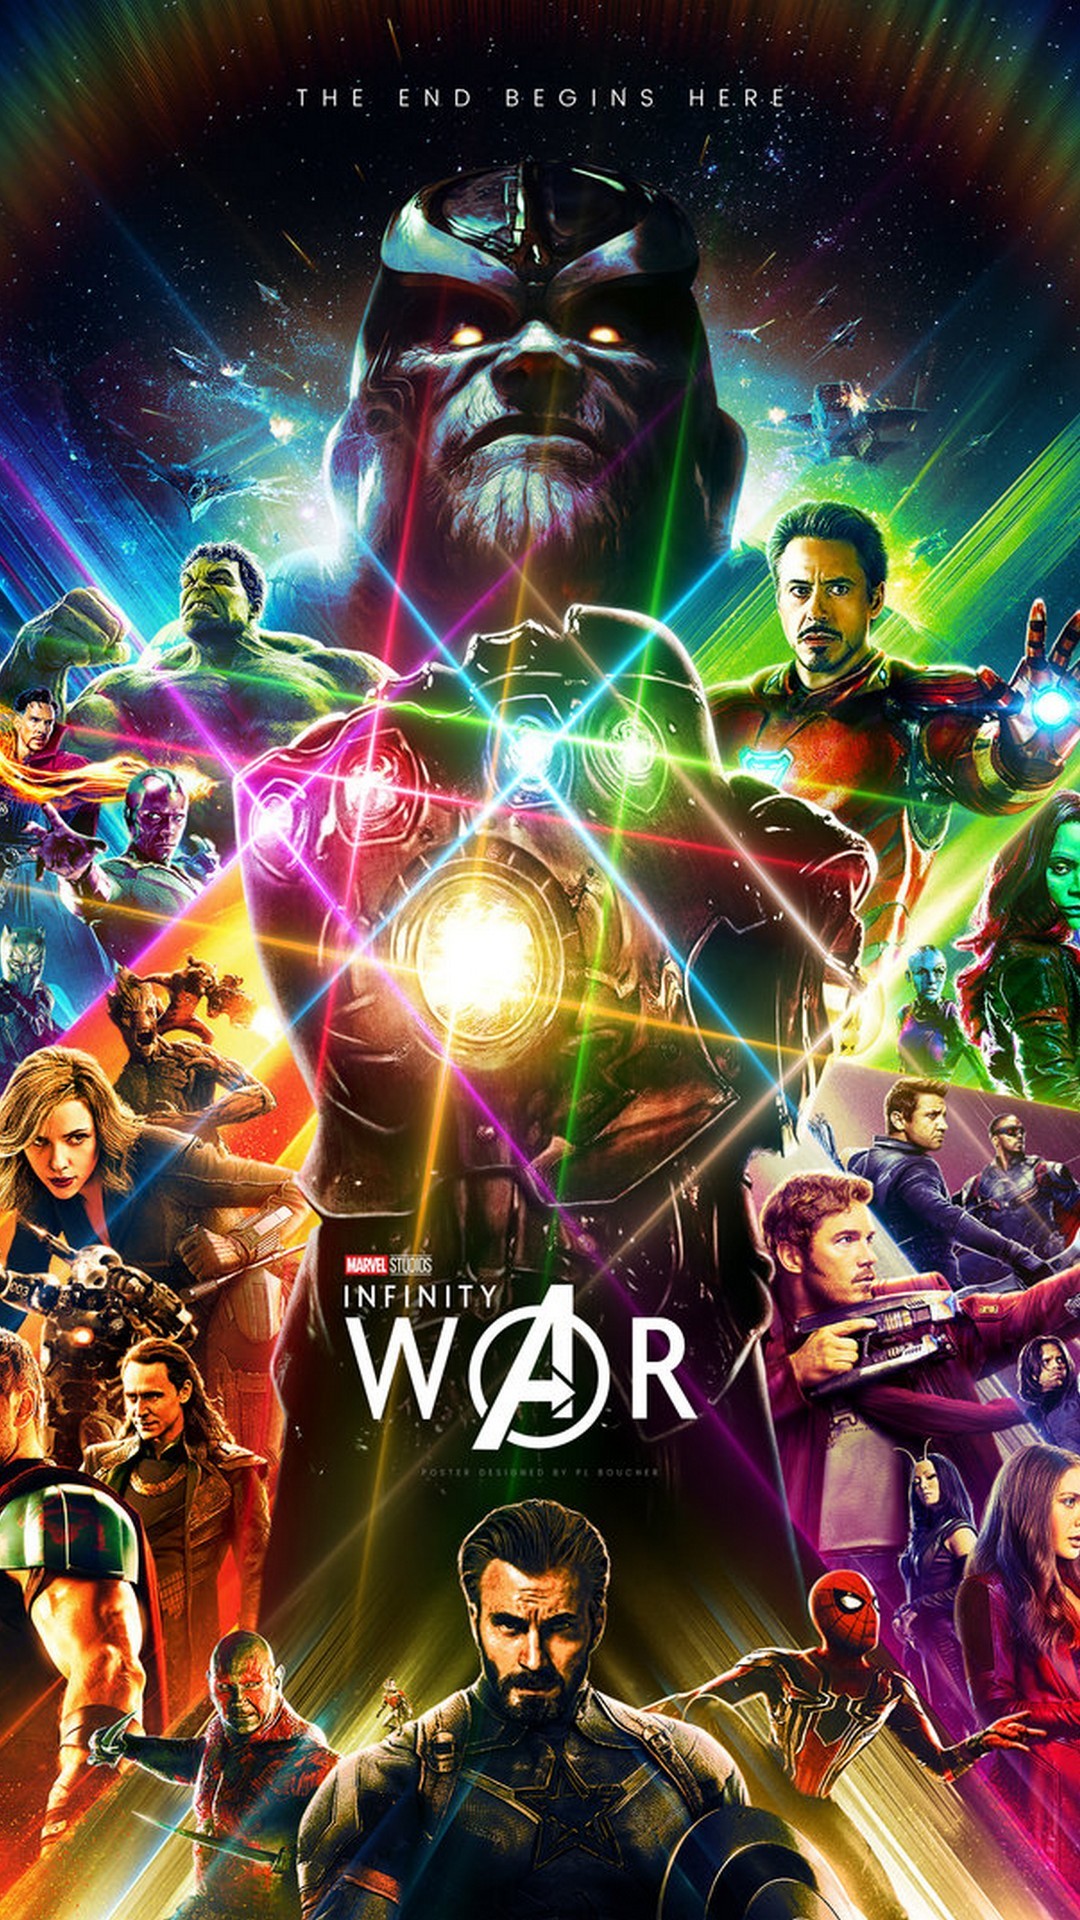 Avengers Infinity War Wallpaper Android with HD resolution 1080x1920